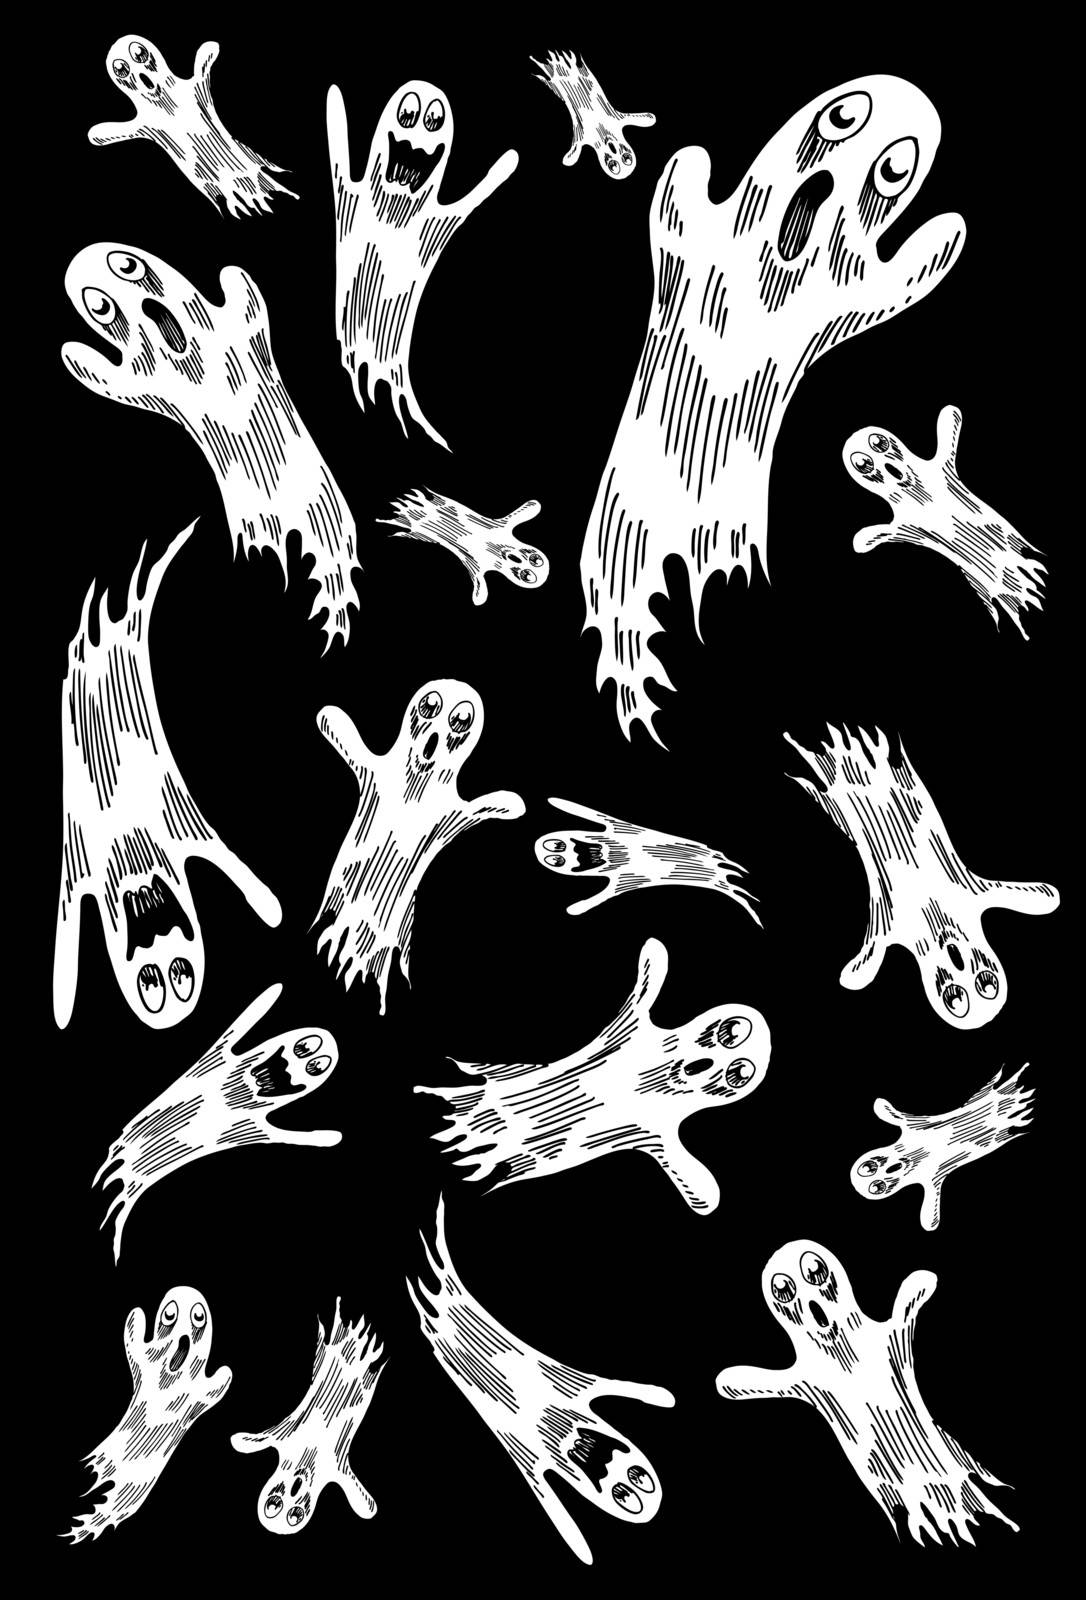 Halloween background of hand drawn flying ghosts.